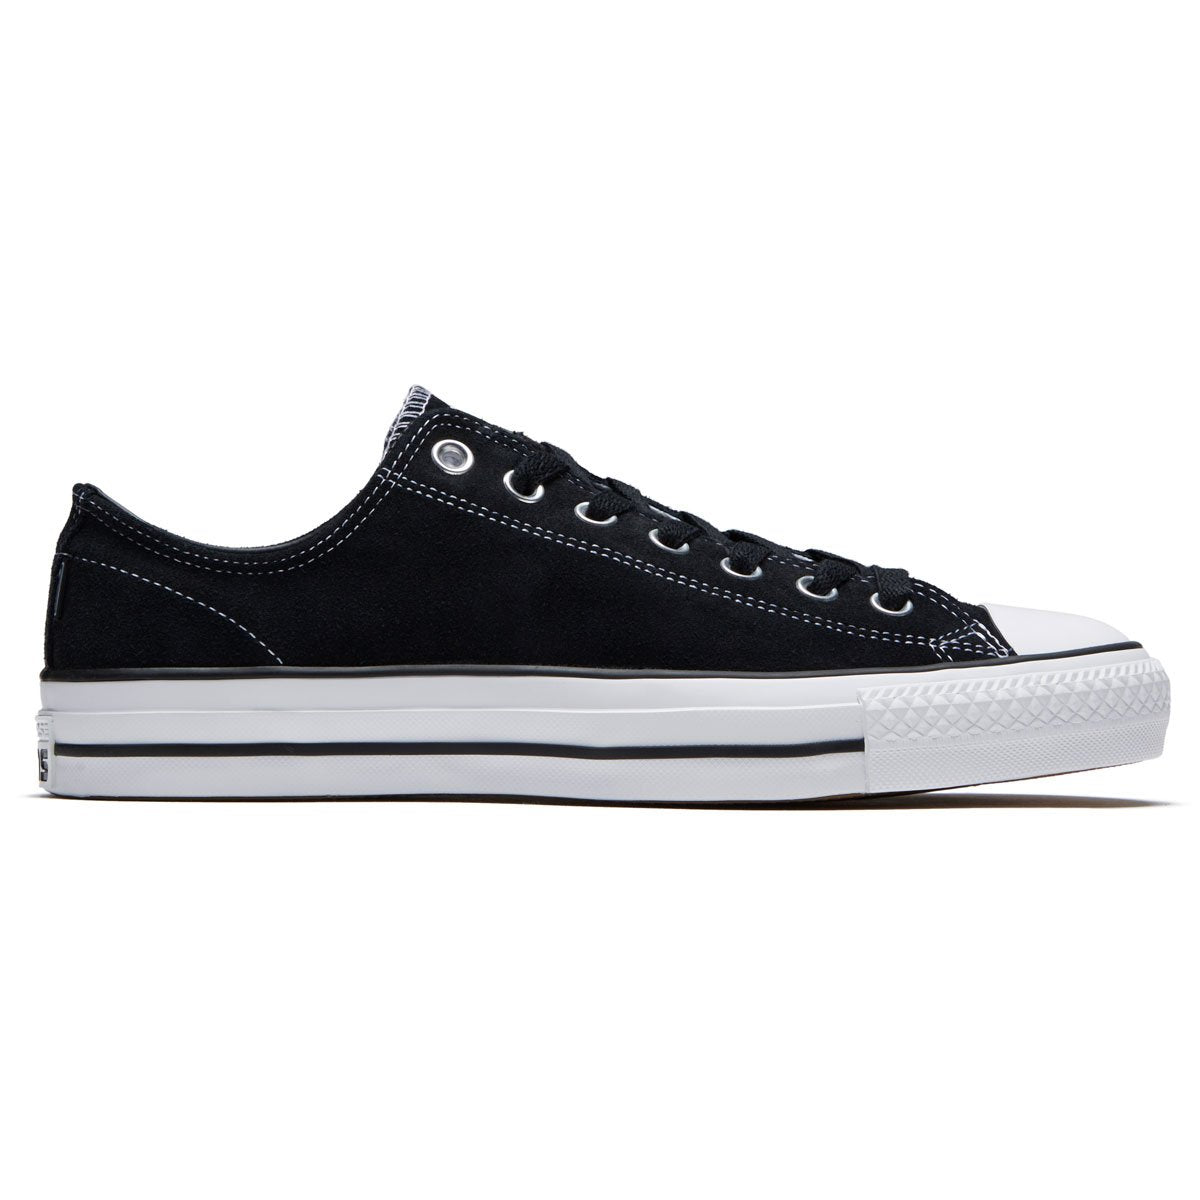 Converse Chuck Taylor All Star Pro Suede Ox Shoes - Black/Black/White CCS